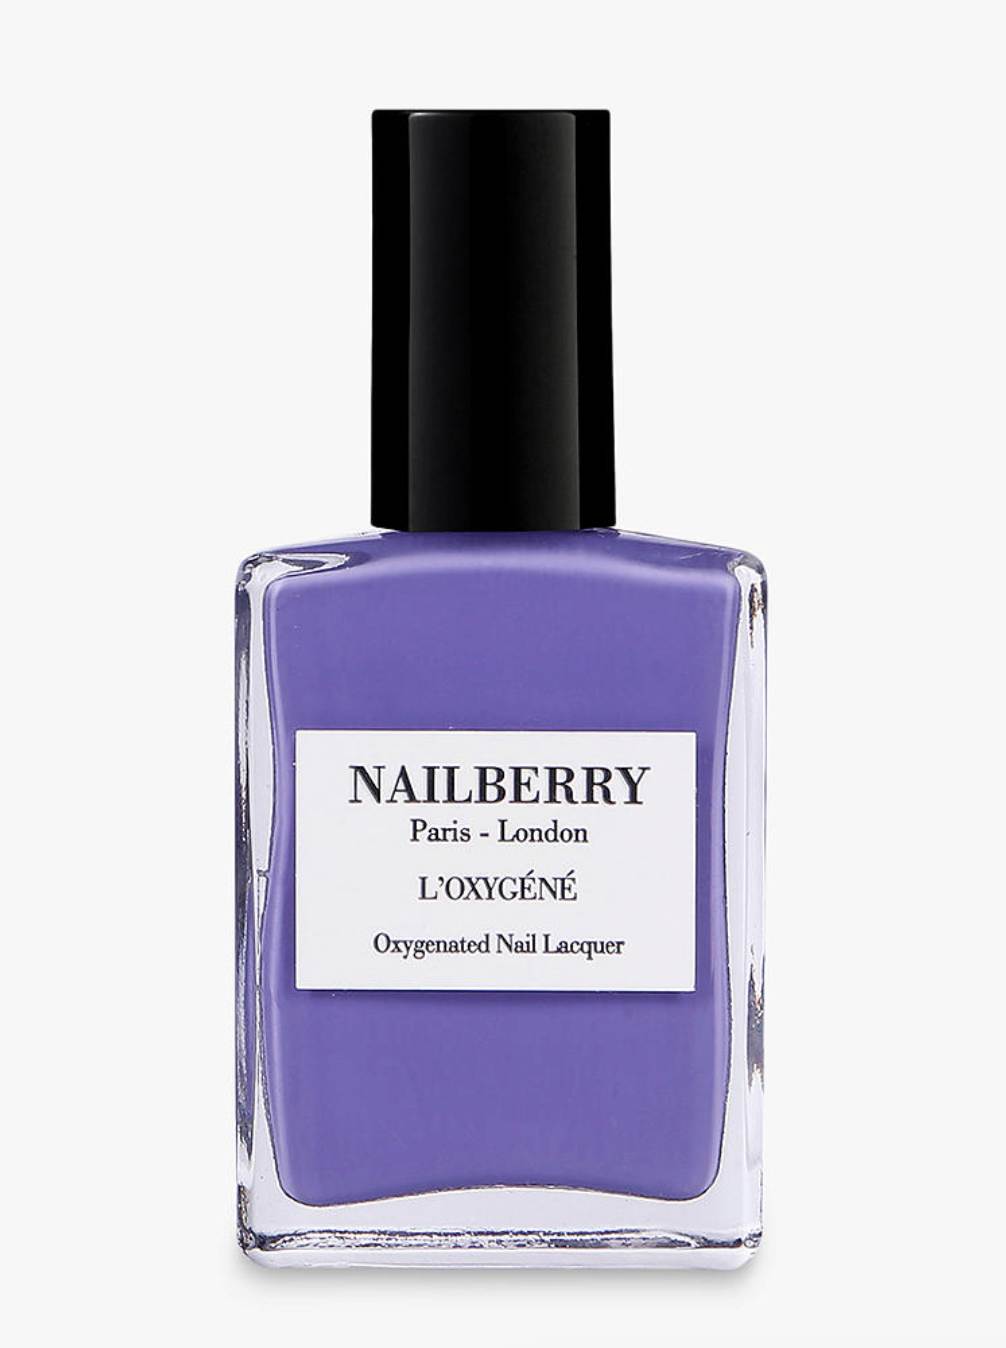 Nailberry + L’Oxygéné Oxygenated Nail Lacquer, Bluebell